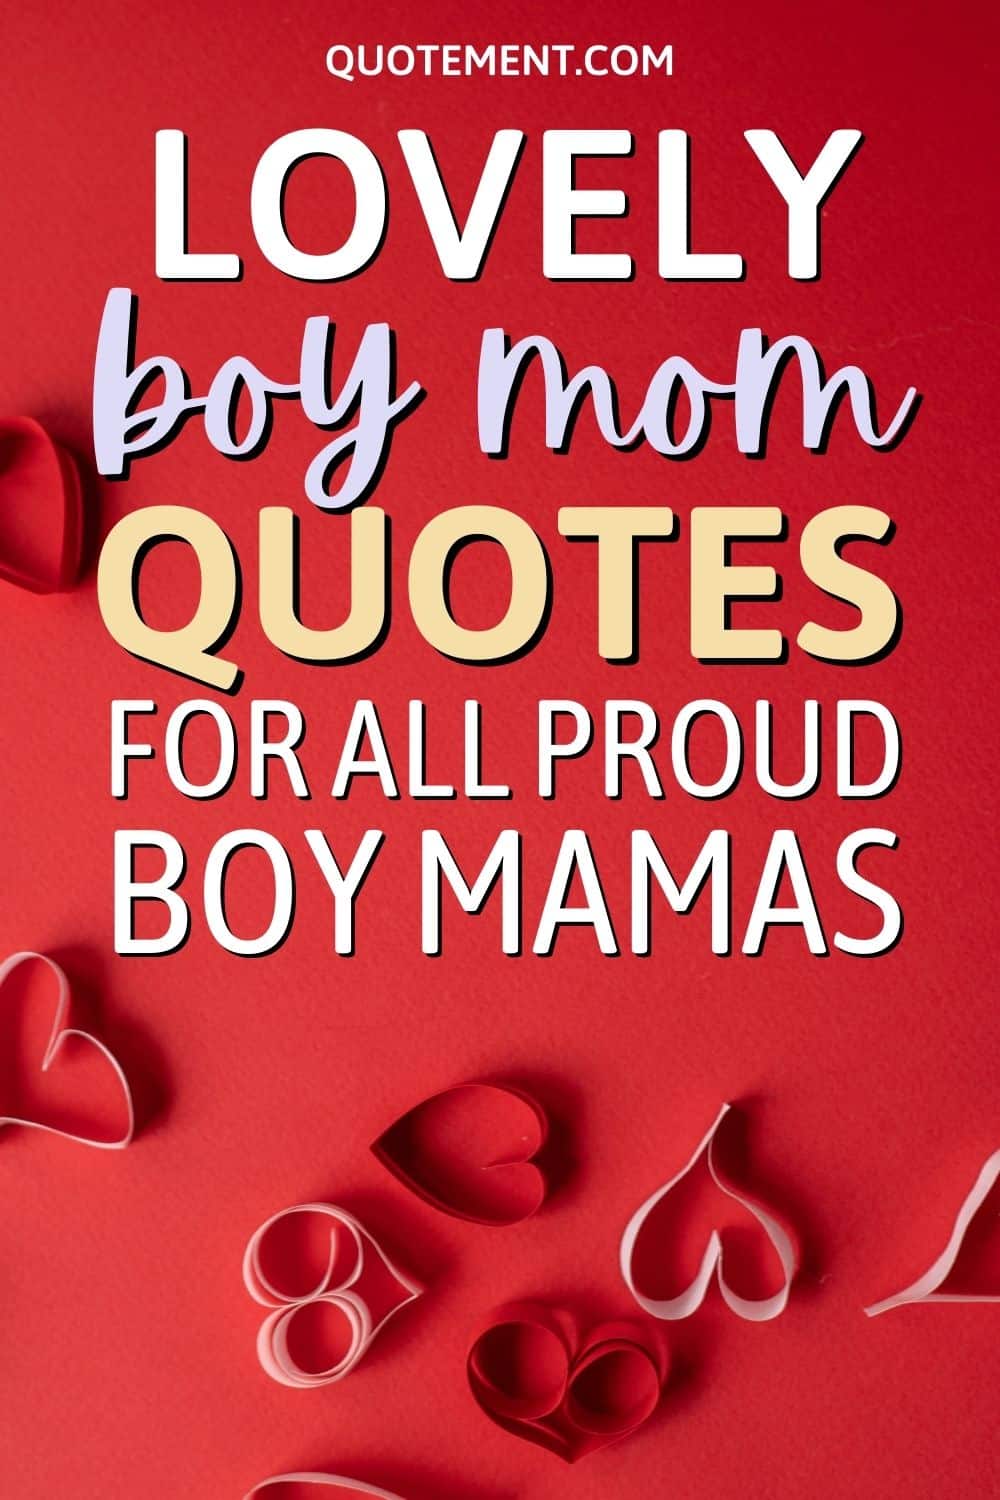 120 Cool Boy Mom Quotes For All The Proud Moms Raising Boys